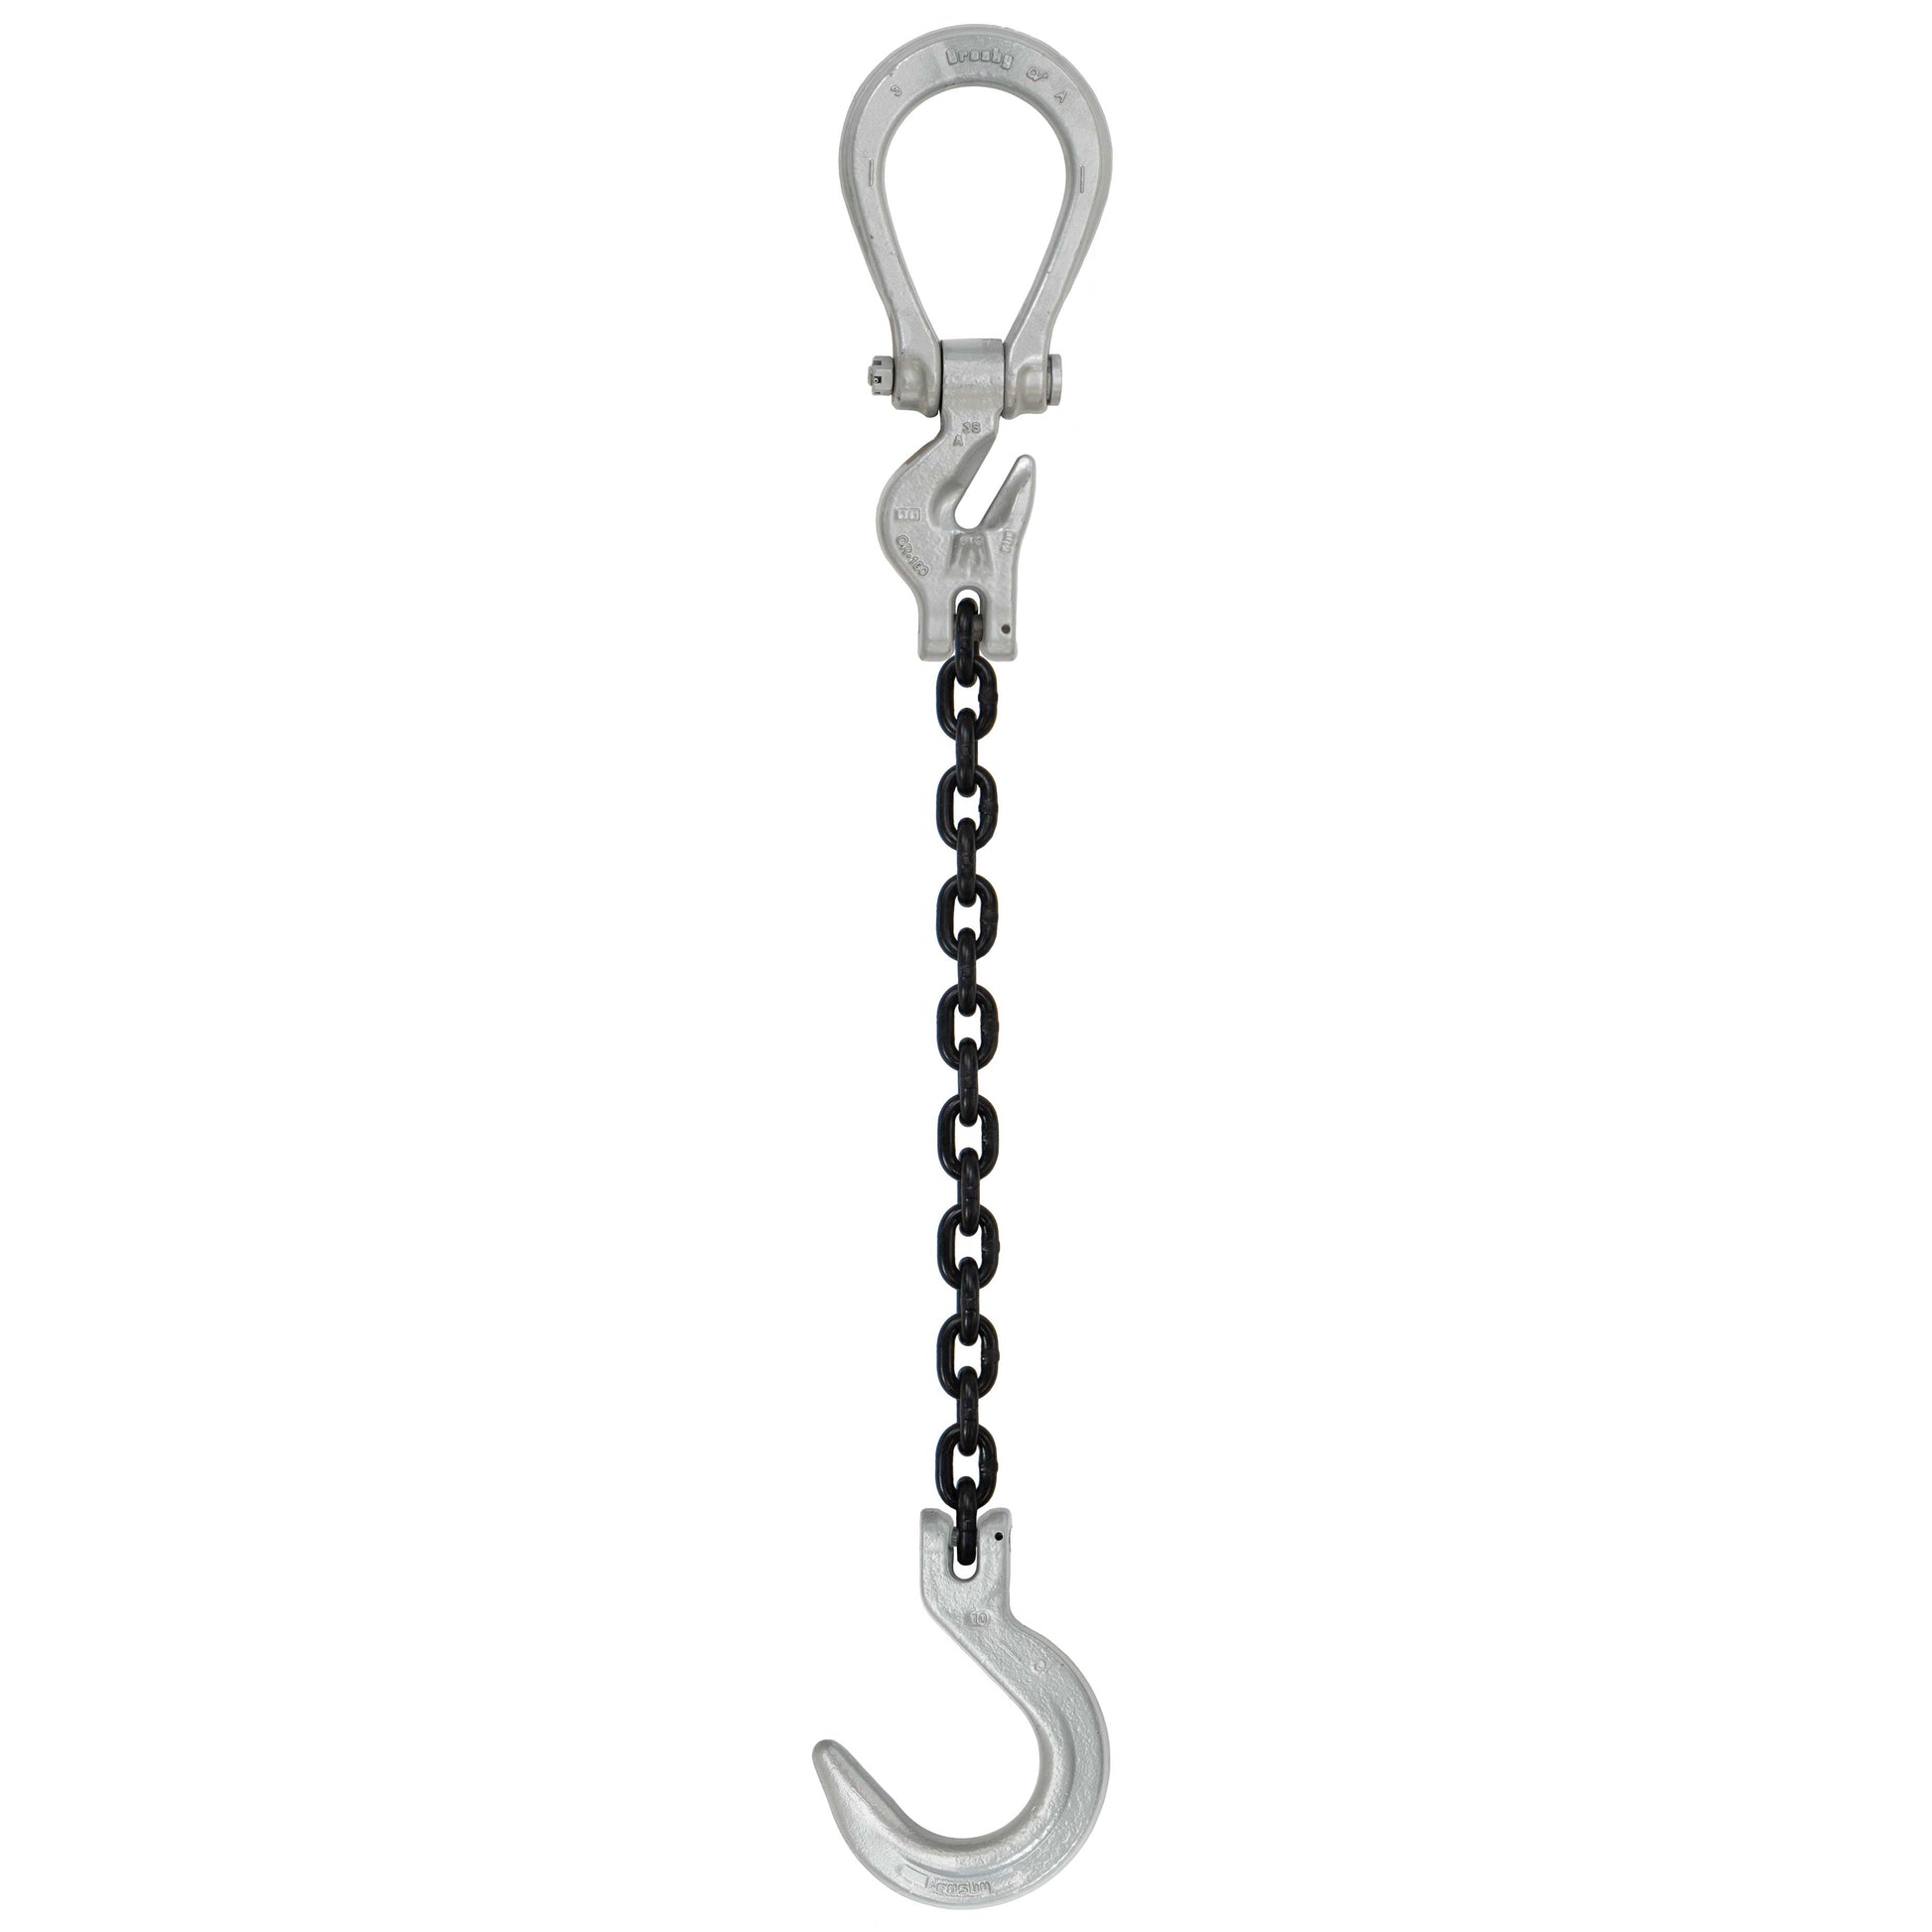 38 inch x 10 foot Domestic Adjustable Single Leg Chain Sling w Crosby Foundry Hook Grade 100 image 1 of 2